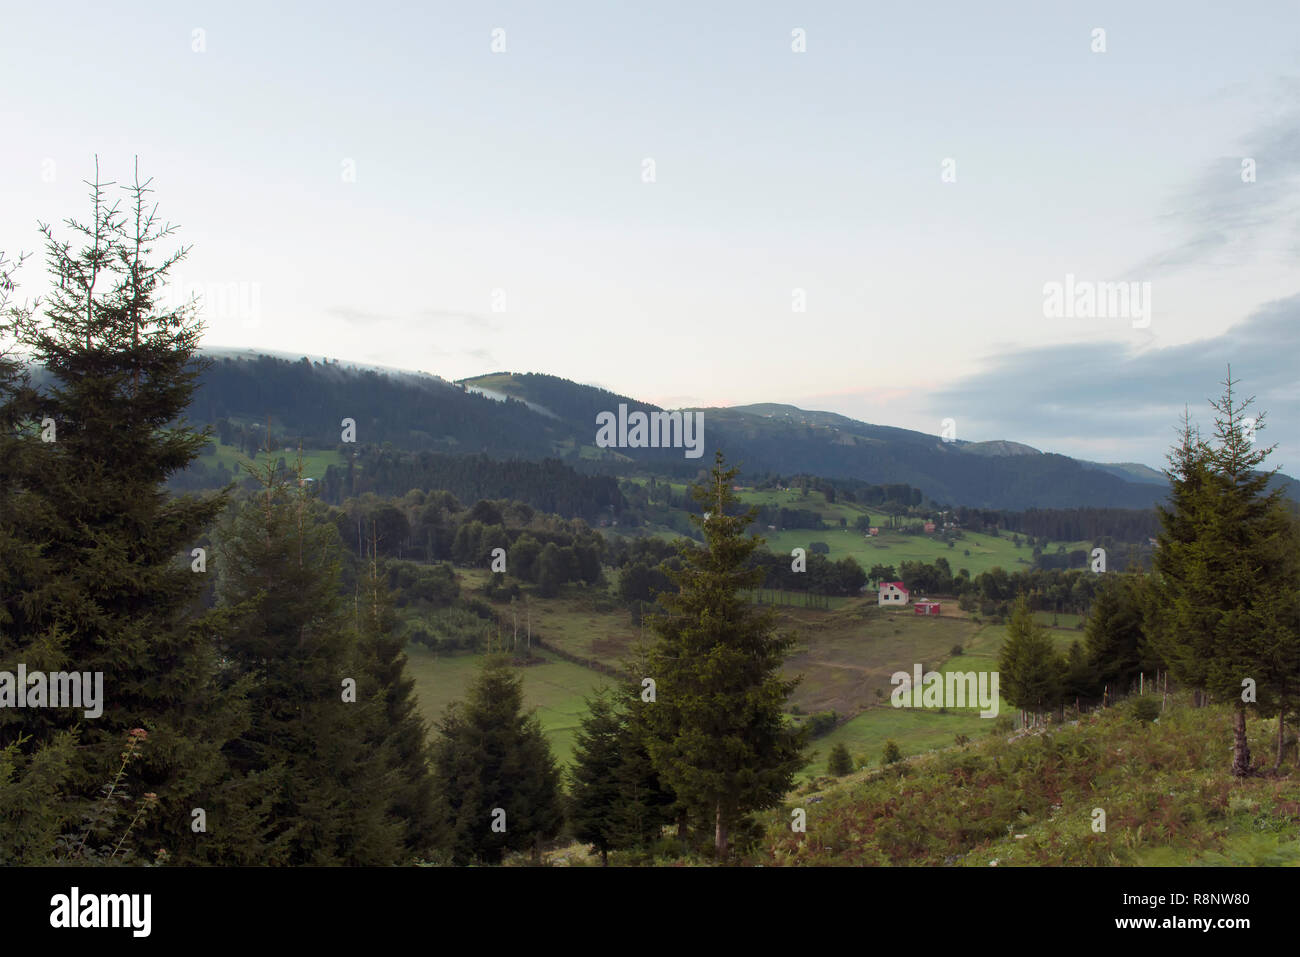 View of forest trees, houses, mountains, valley and beautiful nature. The image is captured in Trabzon/Rize area of Black Sea region located at northe Stock Photo